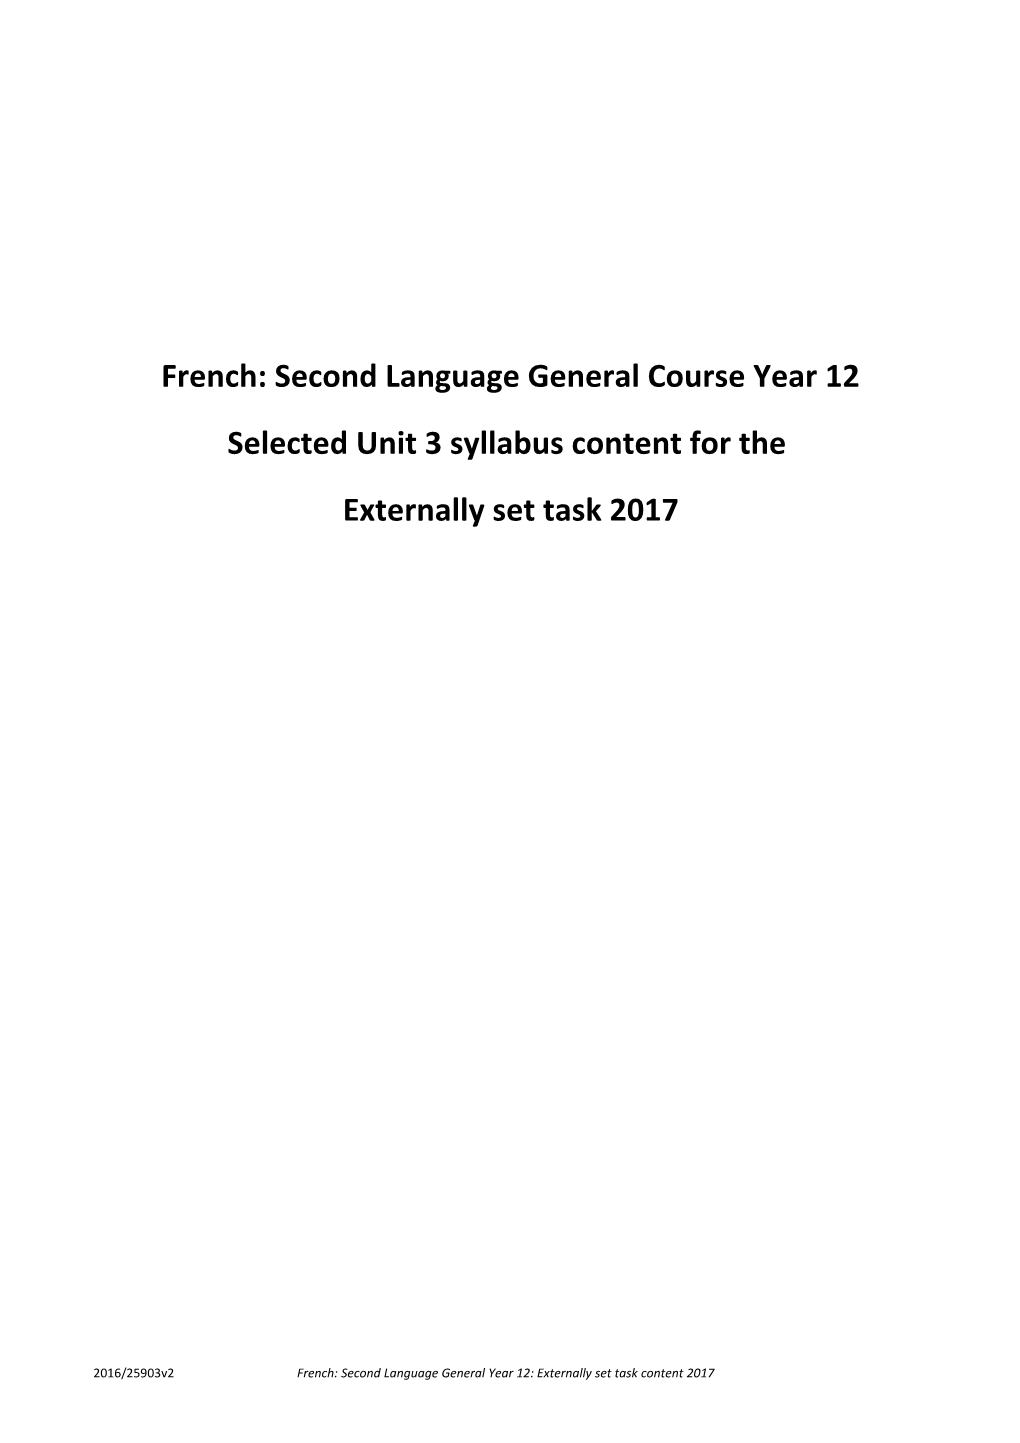 French: Second Language General Course Year 12